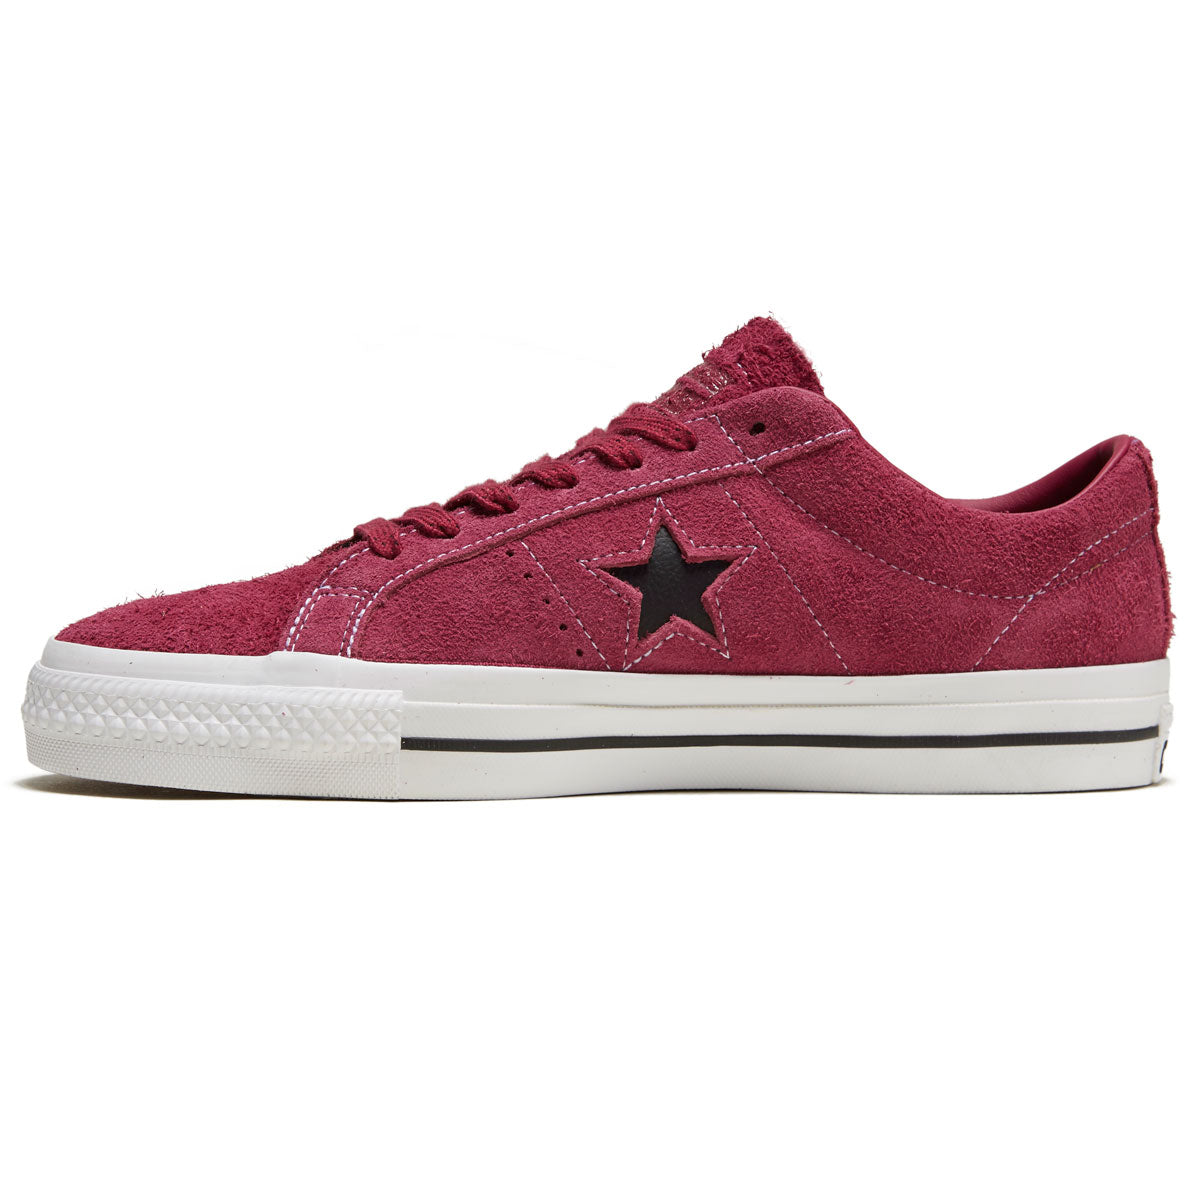 Converse One Star Pro Ox Shoes - Legend Berry/White/Black image 2